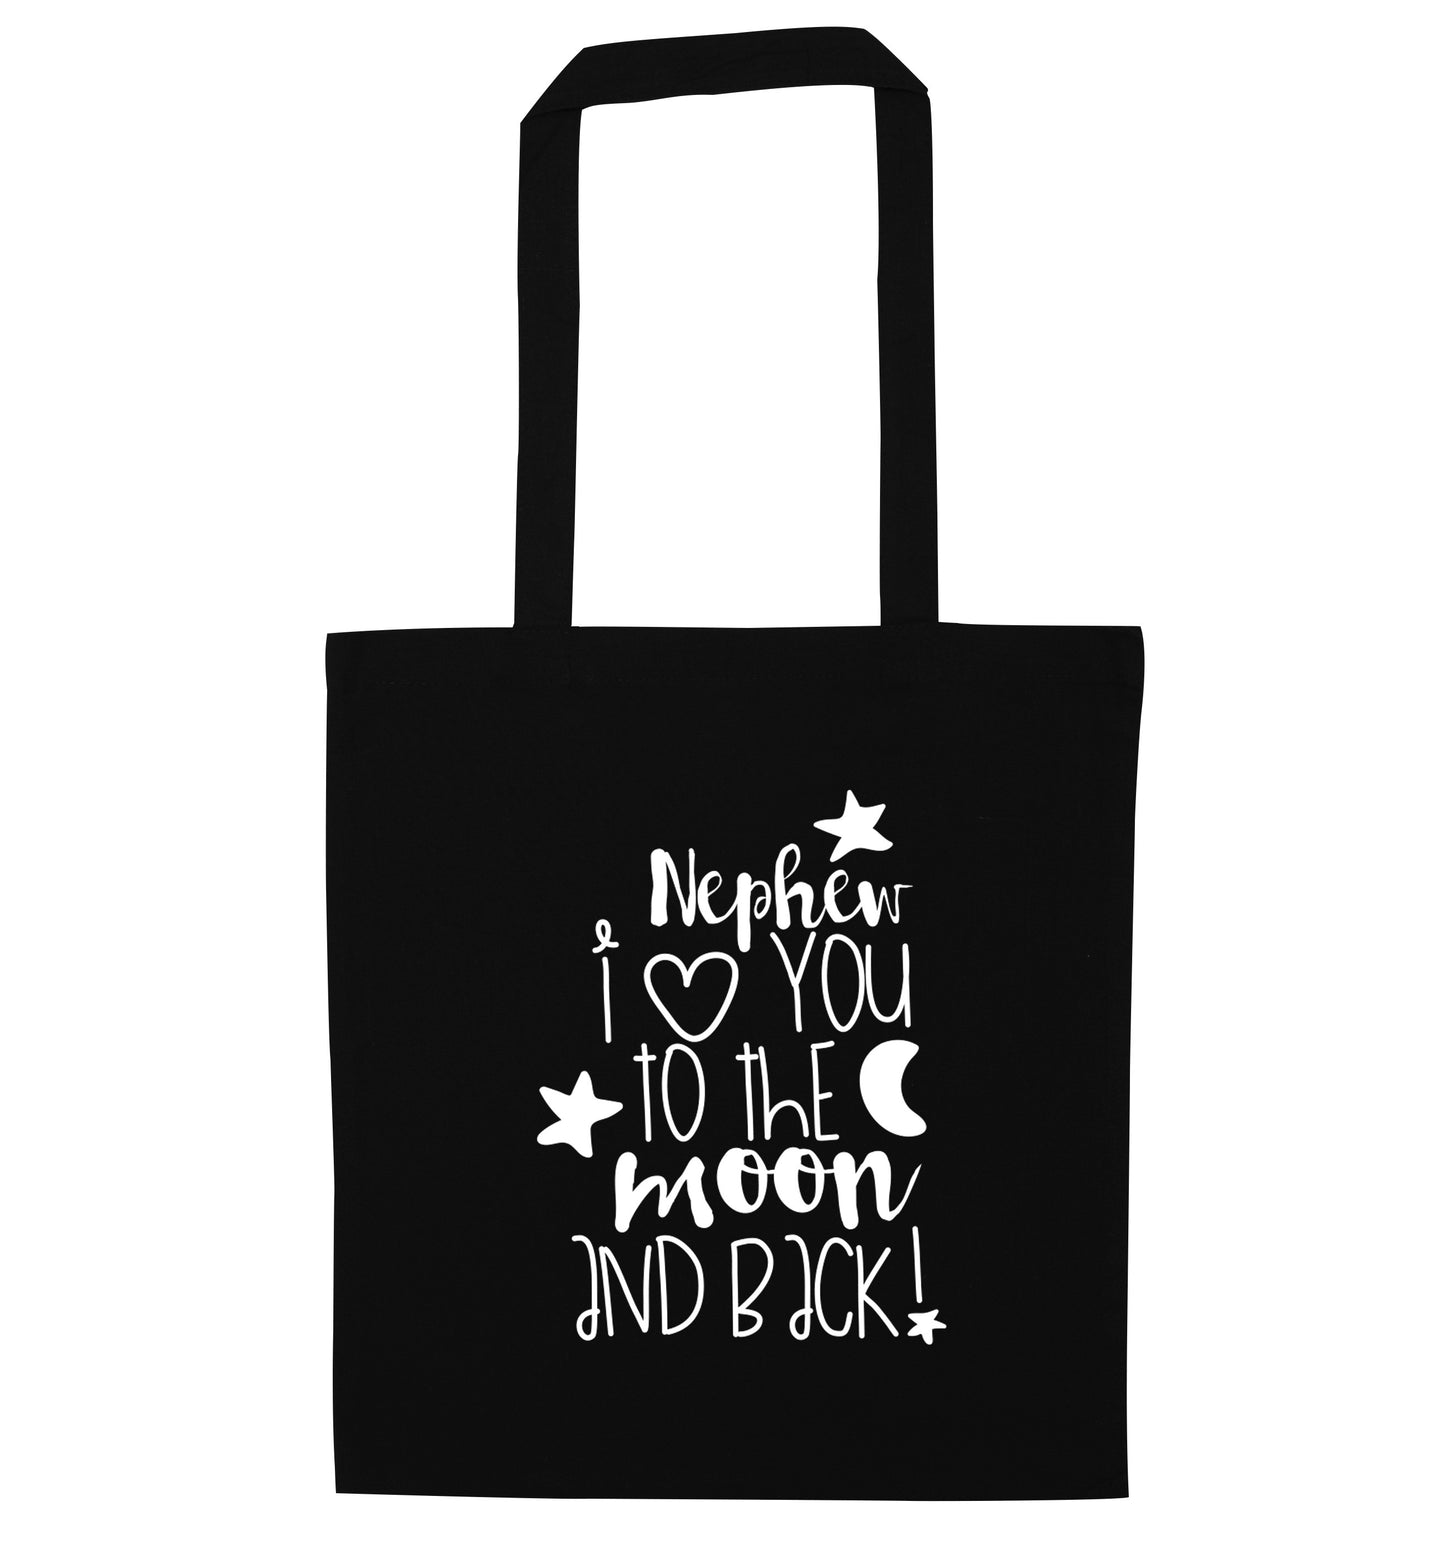 Nephew I love you to the moon and back black tote bag